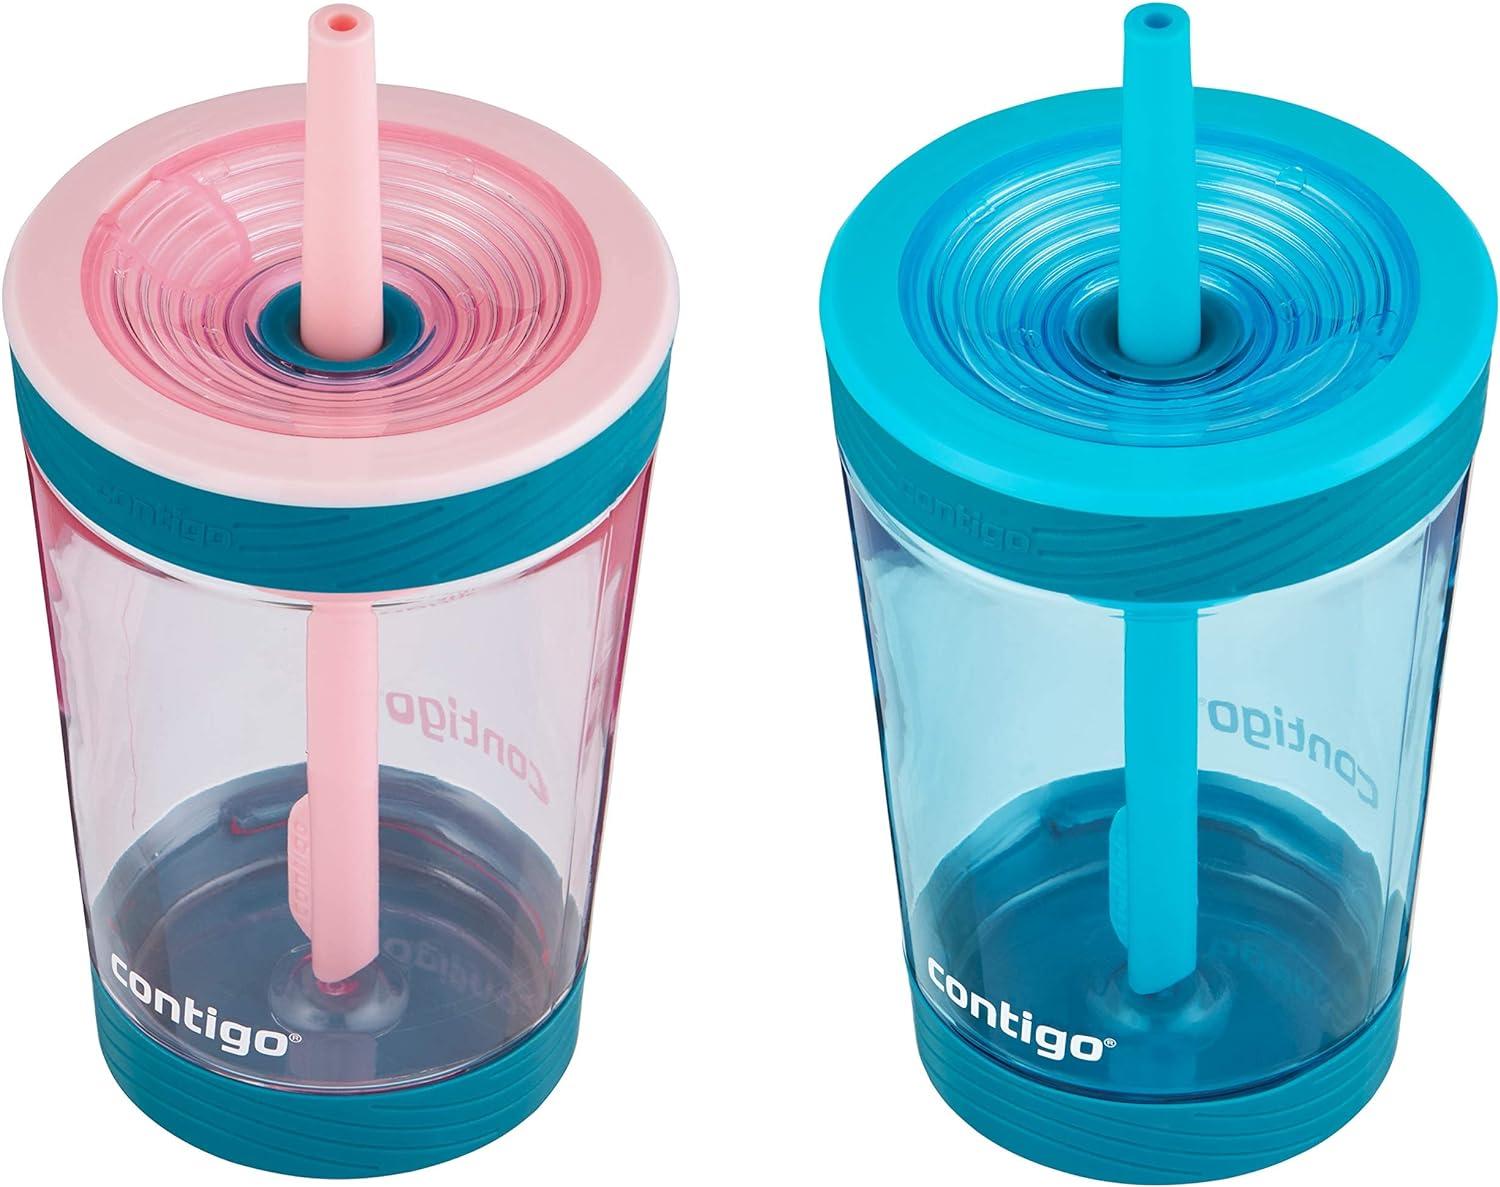 Contigo Kids Spill-Proof 14oz Tumbler with Straw and BPA-Free Plastic Fits  Most Cup Holders and Dishwasher Safe 2-Pack Strawberry Cream & Blue  Raspberry Strawberry Cream & Blue Raspberry 2-Pack 14 oz